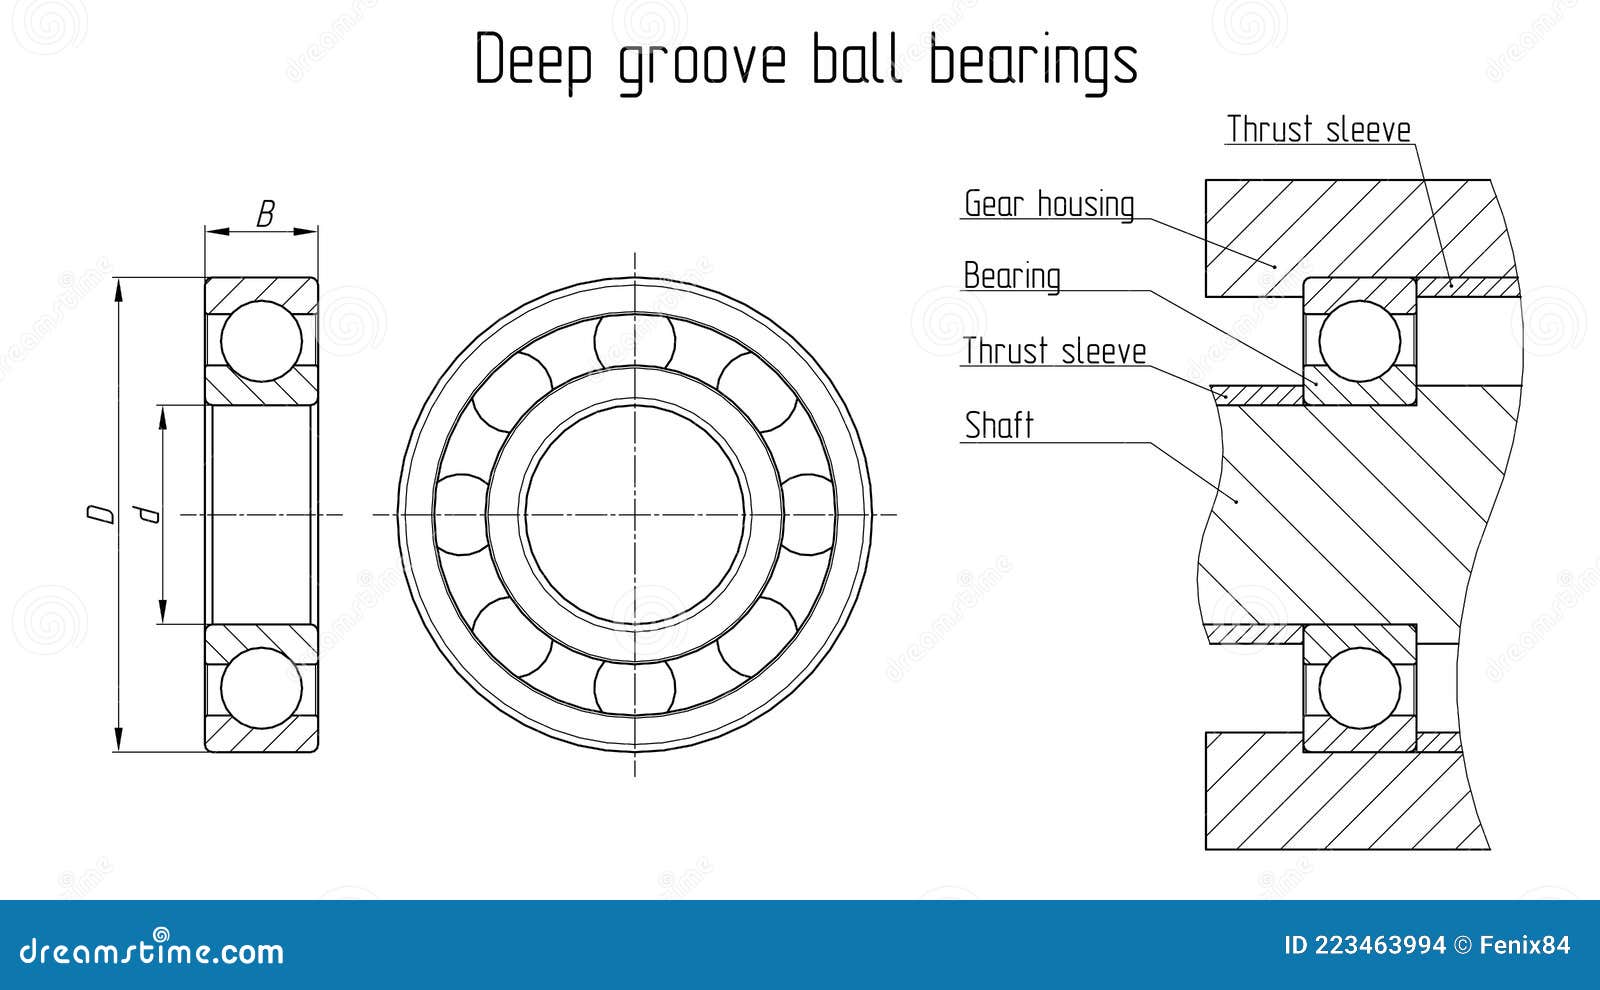 Deepgroove ball bearing details a Sketch b Cross section   Download Scientific Diagram